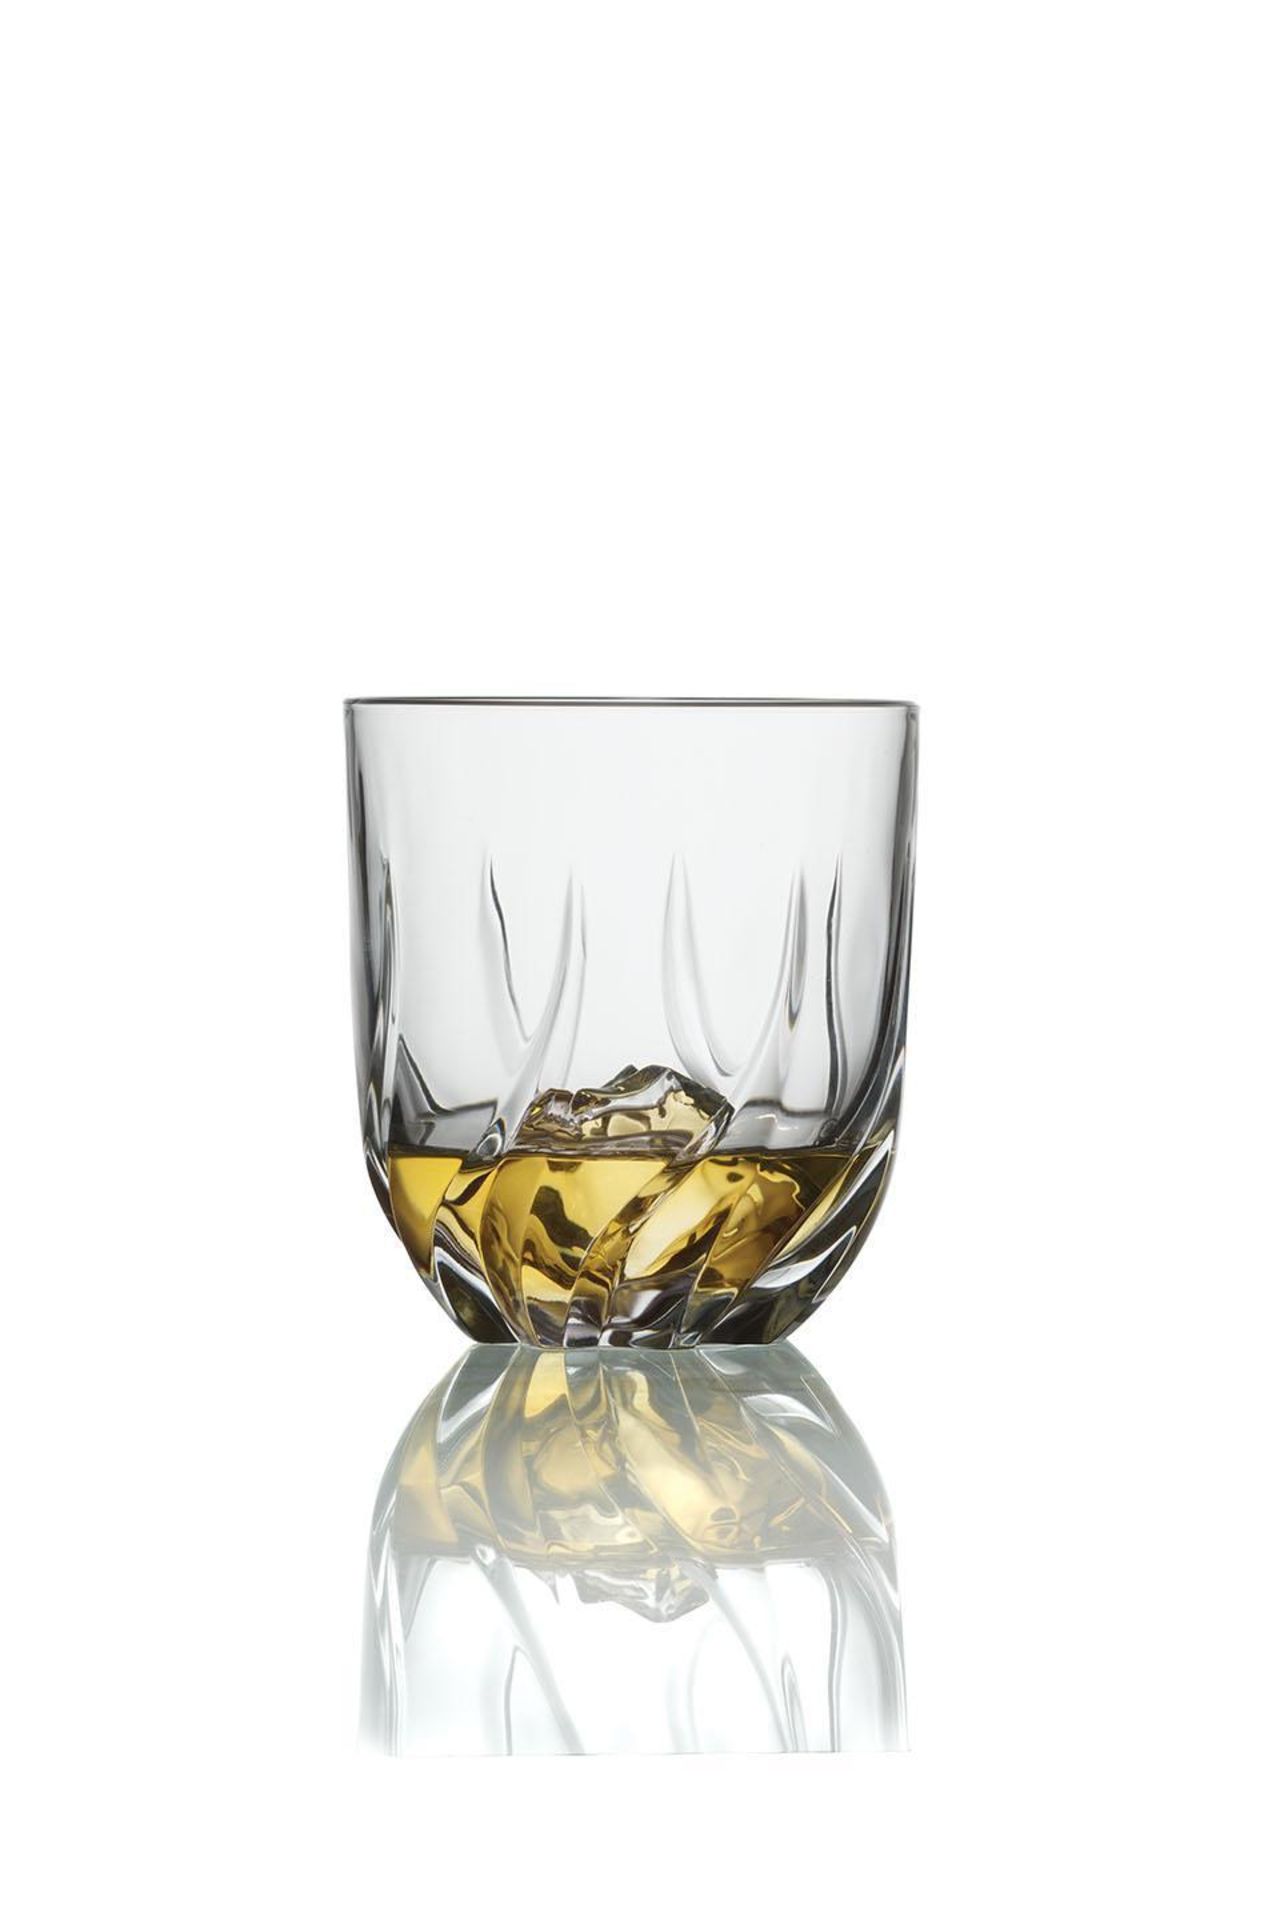 V *TRADE QTY* Brand New RCR Twist Whiskey Glasses 33cl - Made In Italy X 8 YOUR BID PRICE TO BE